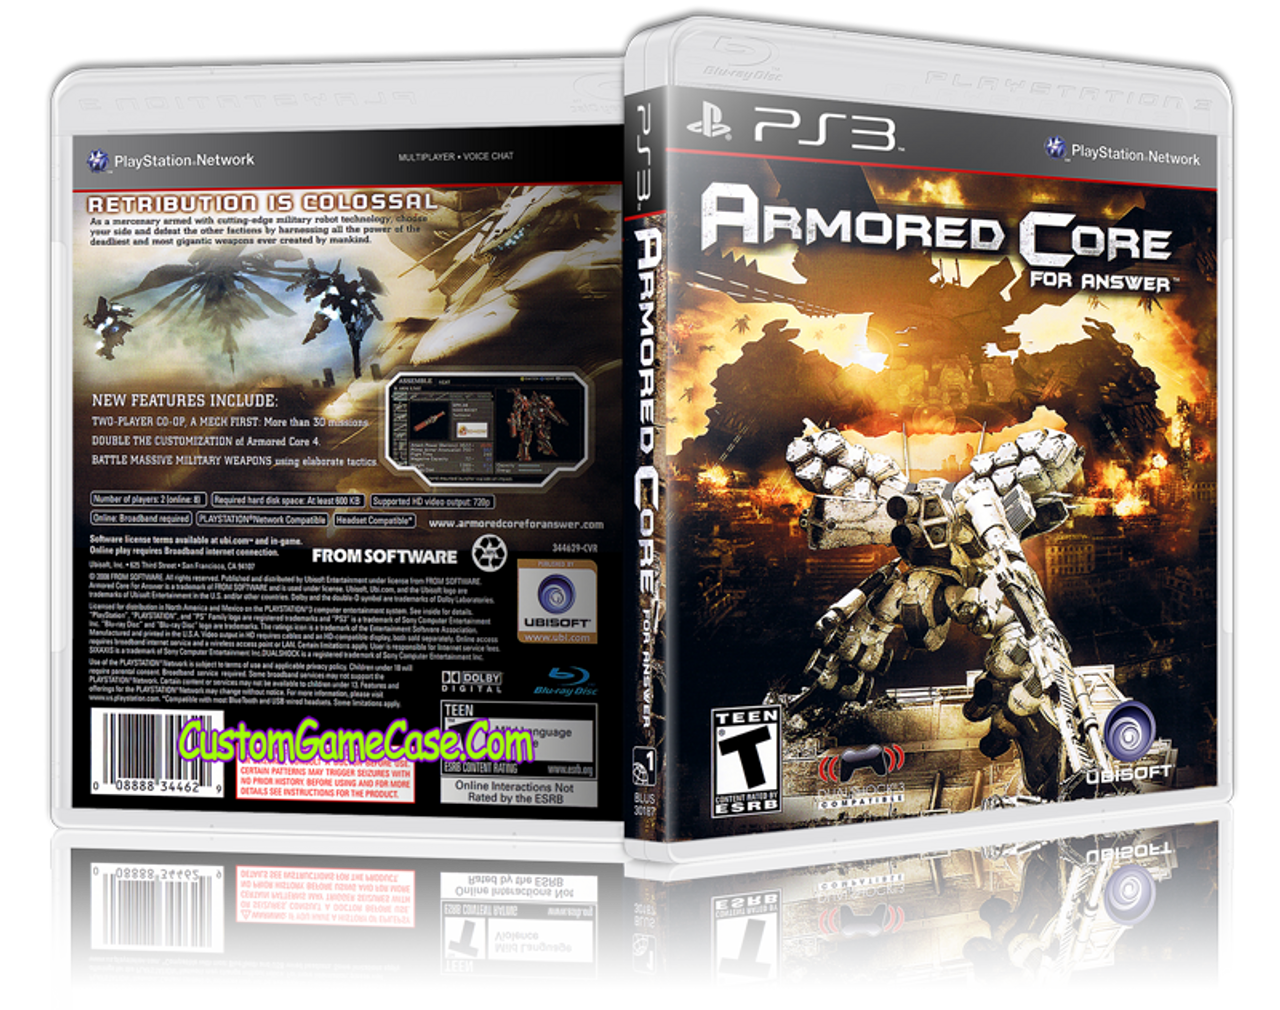 Armored Core For Answer Sony Playstation 3 Ps3 Empty Custom Replacement Case Custom Game Case